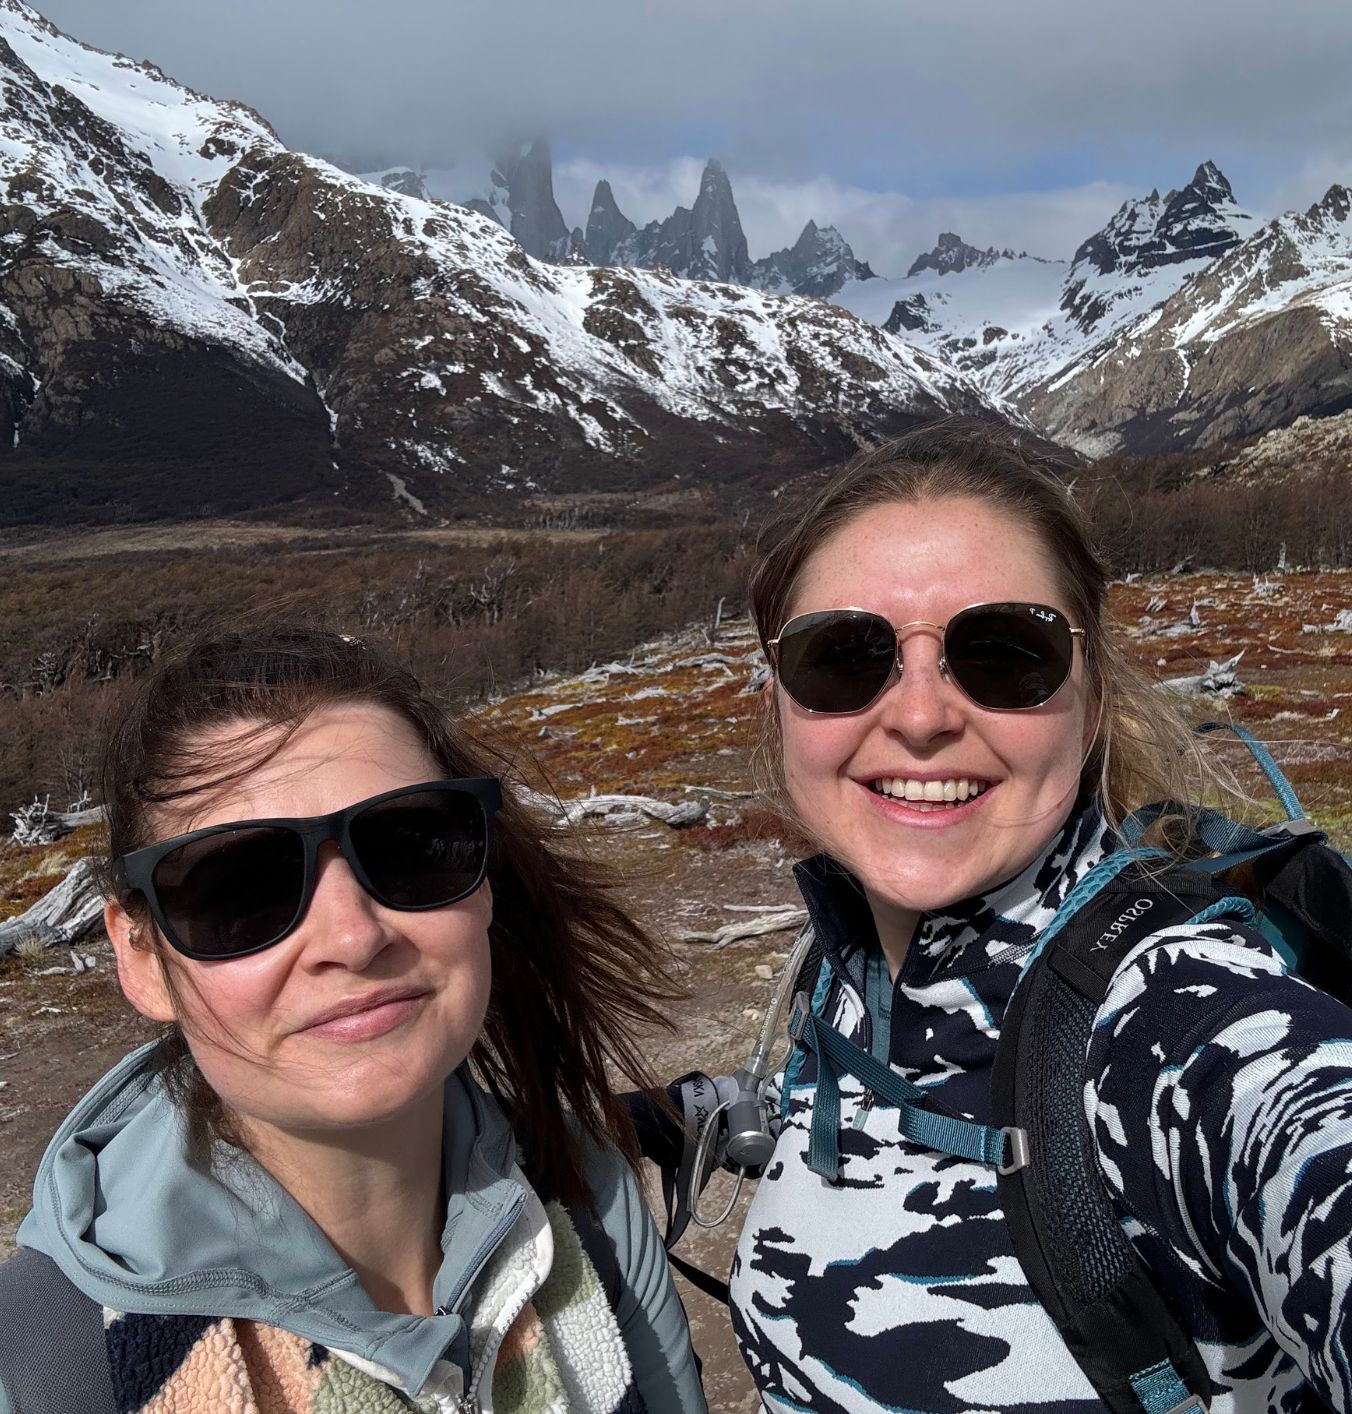 My trip to Argentina taught me to stop obsessing about traditional milestones in life